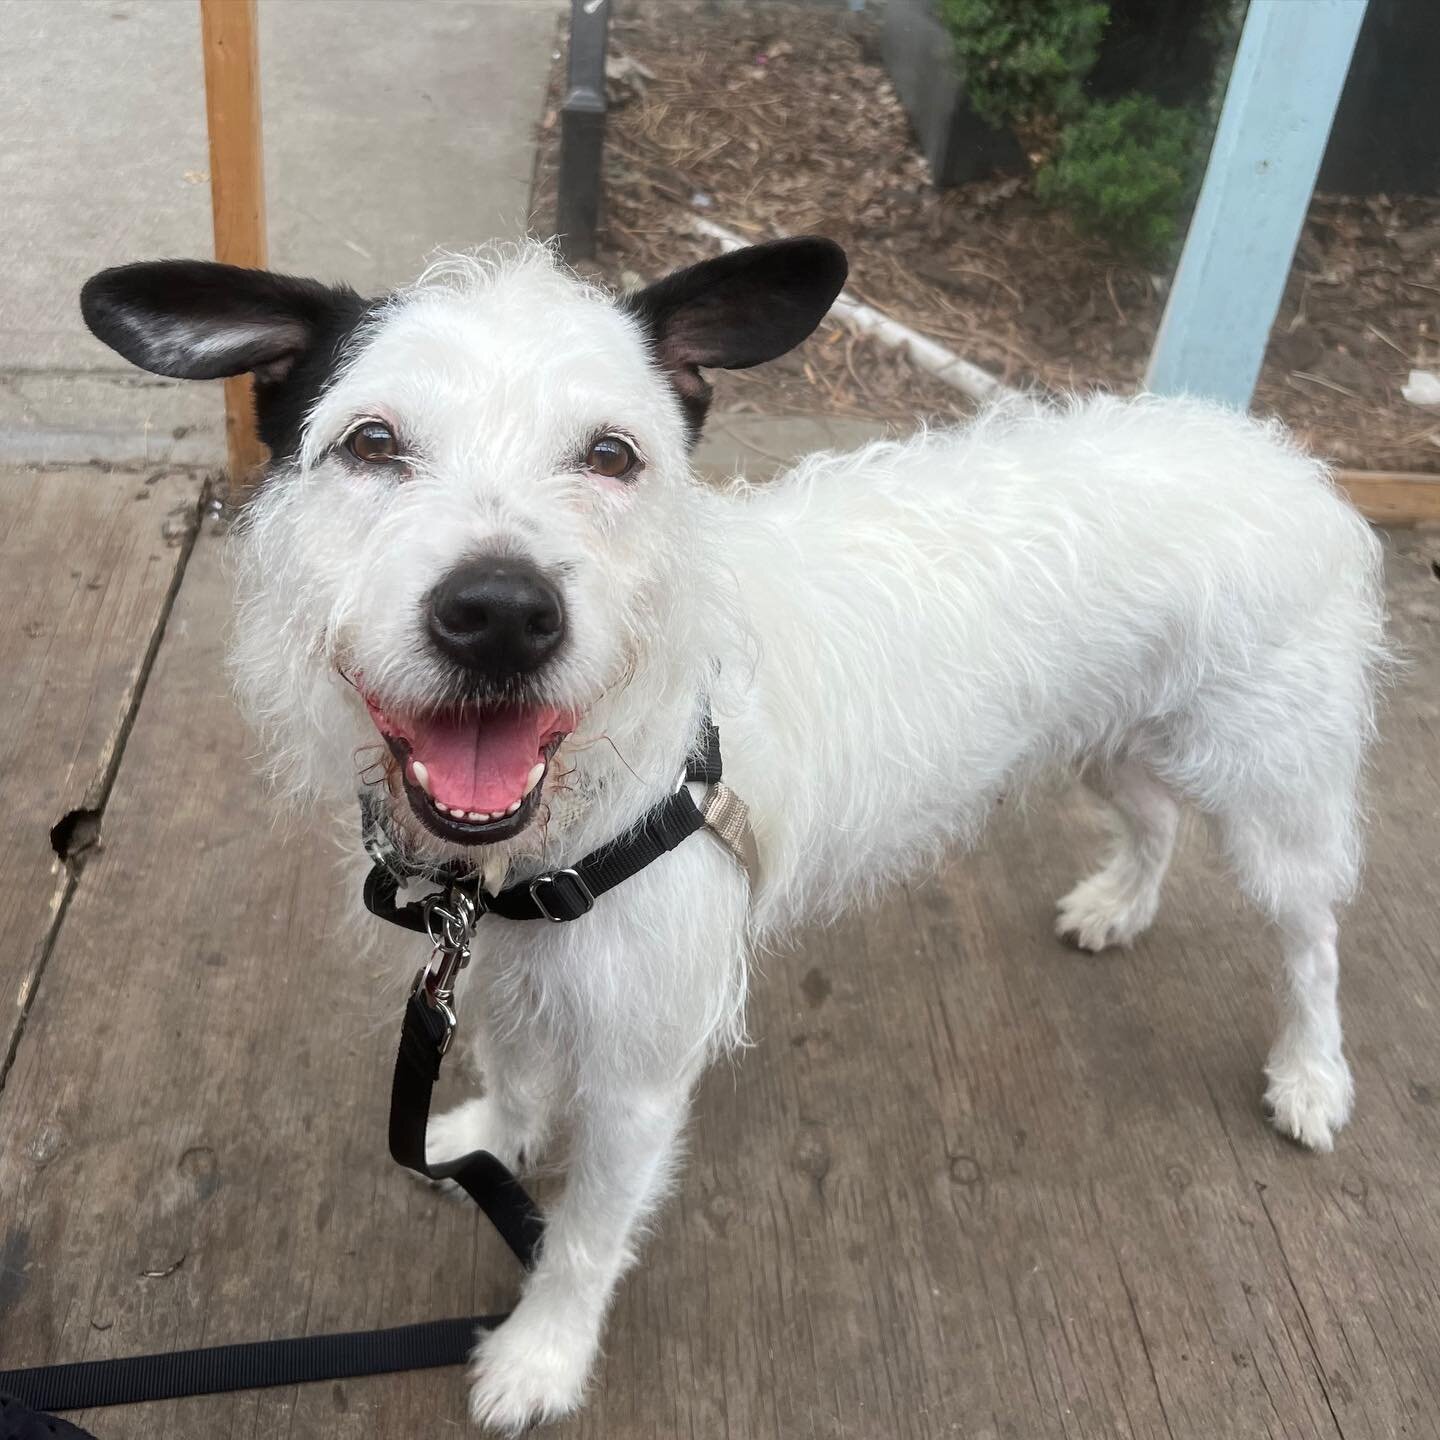 Meet Cairo! 
This incredibly sweet 2 year old 35lb scruffy sweetie is looking for her forever family! She came to us from a partner that needed to help her find her forever family up North. 

Her foster mom says:
&quot;Meet Cairo, a 2 year old, perfe